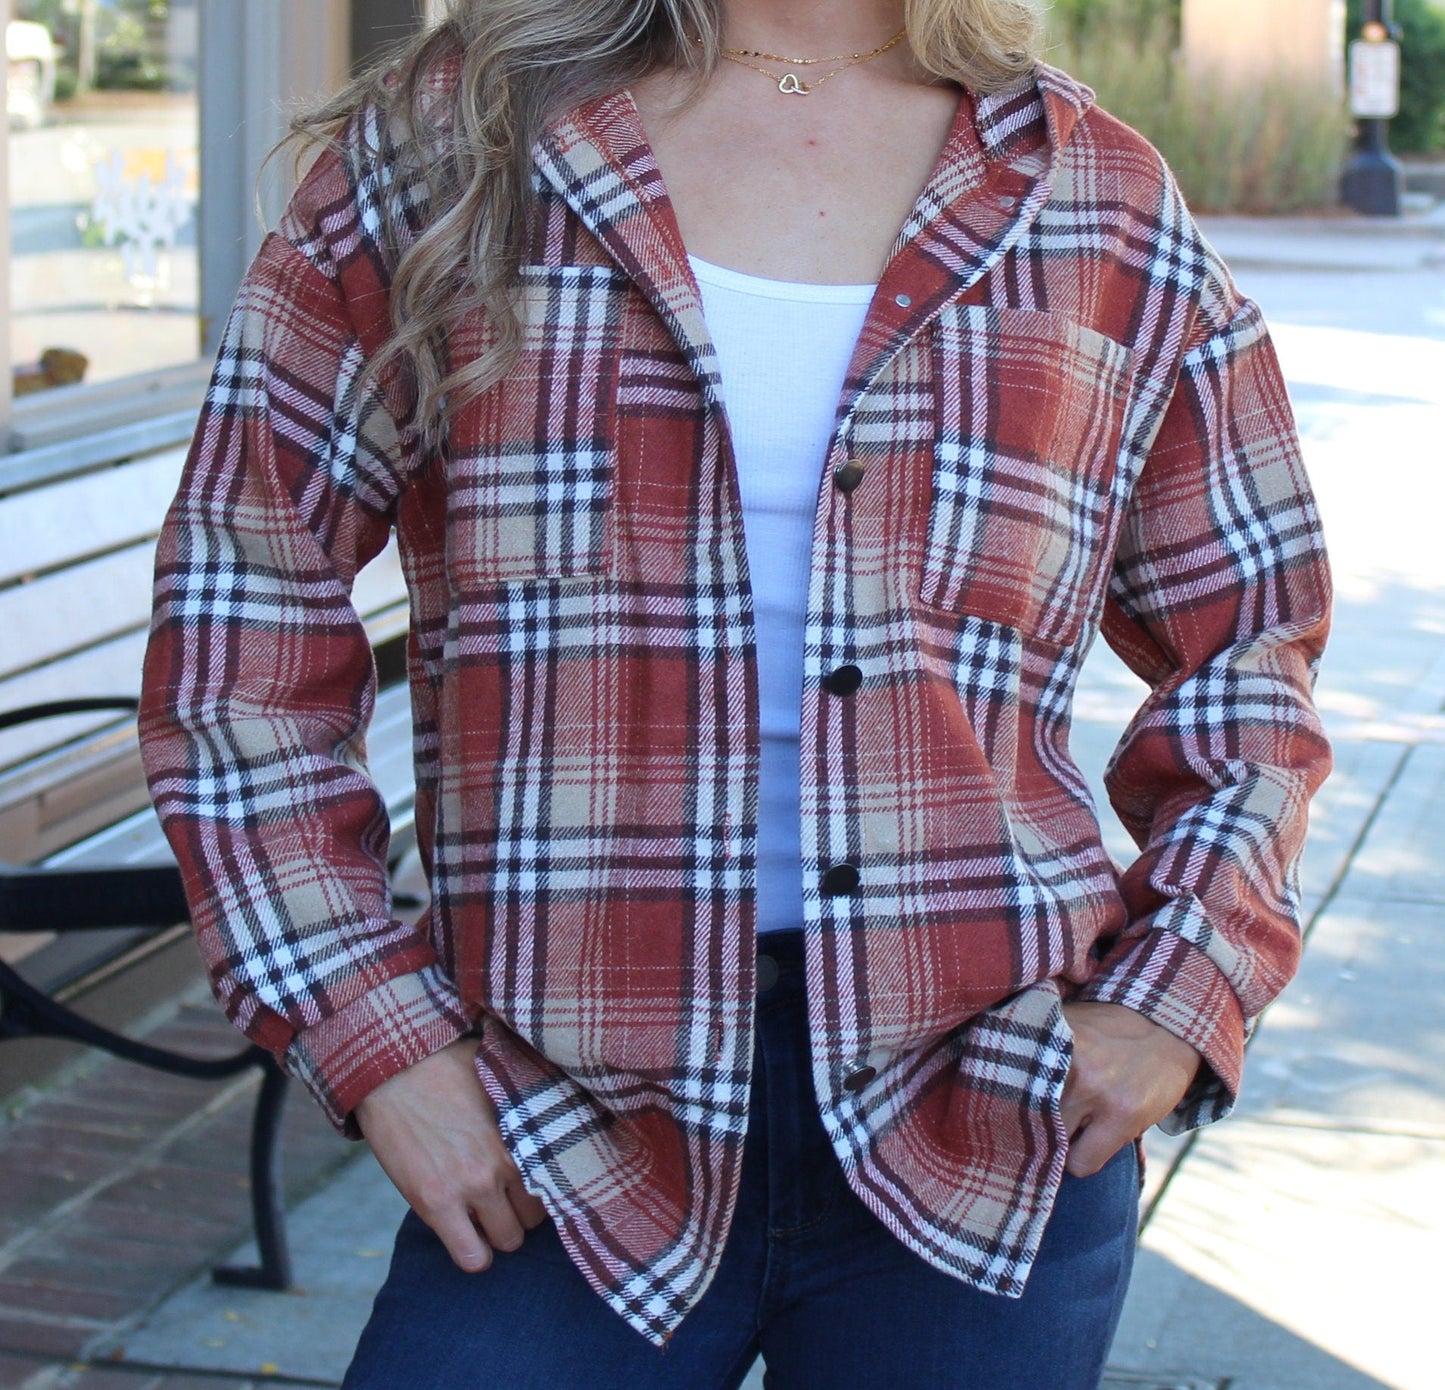 Flannel Button Down Hooded Shirt Coat / Plaid Button Down Shirt / Fall and Winter Shirt / Shirt Jacket